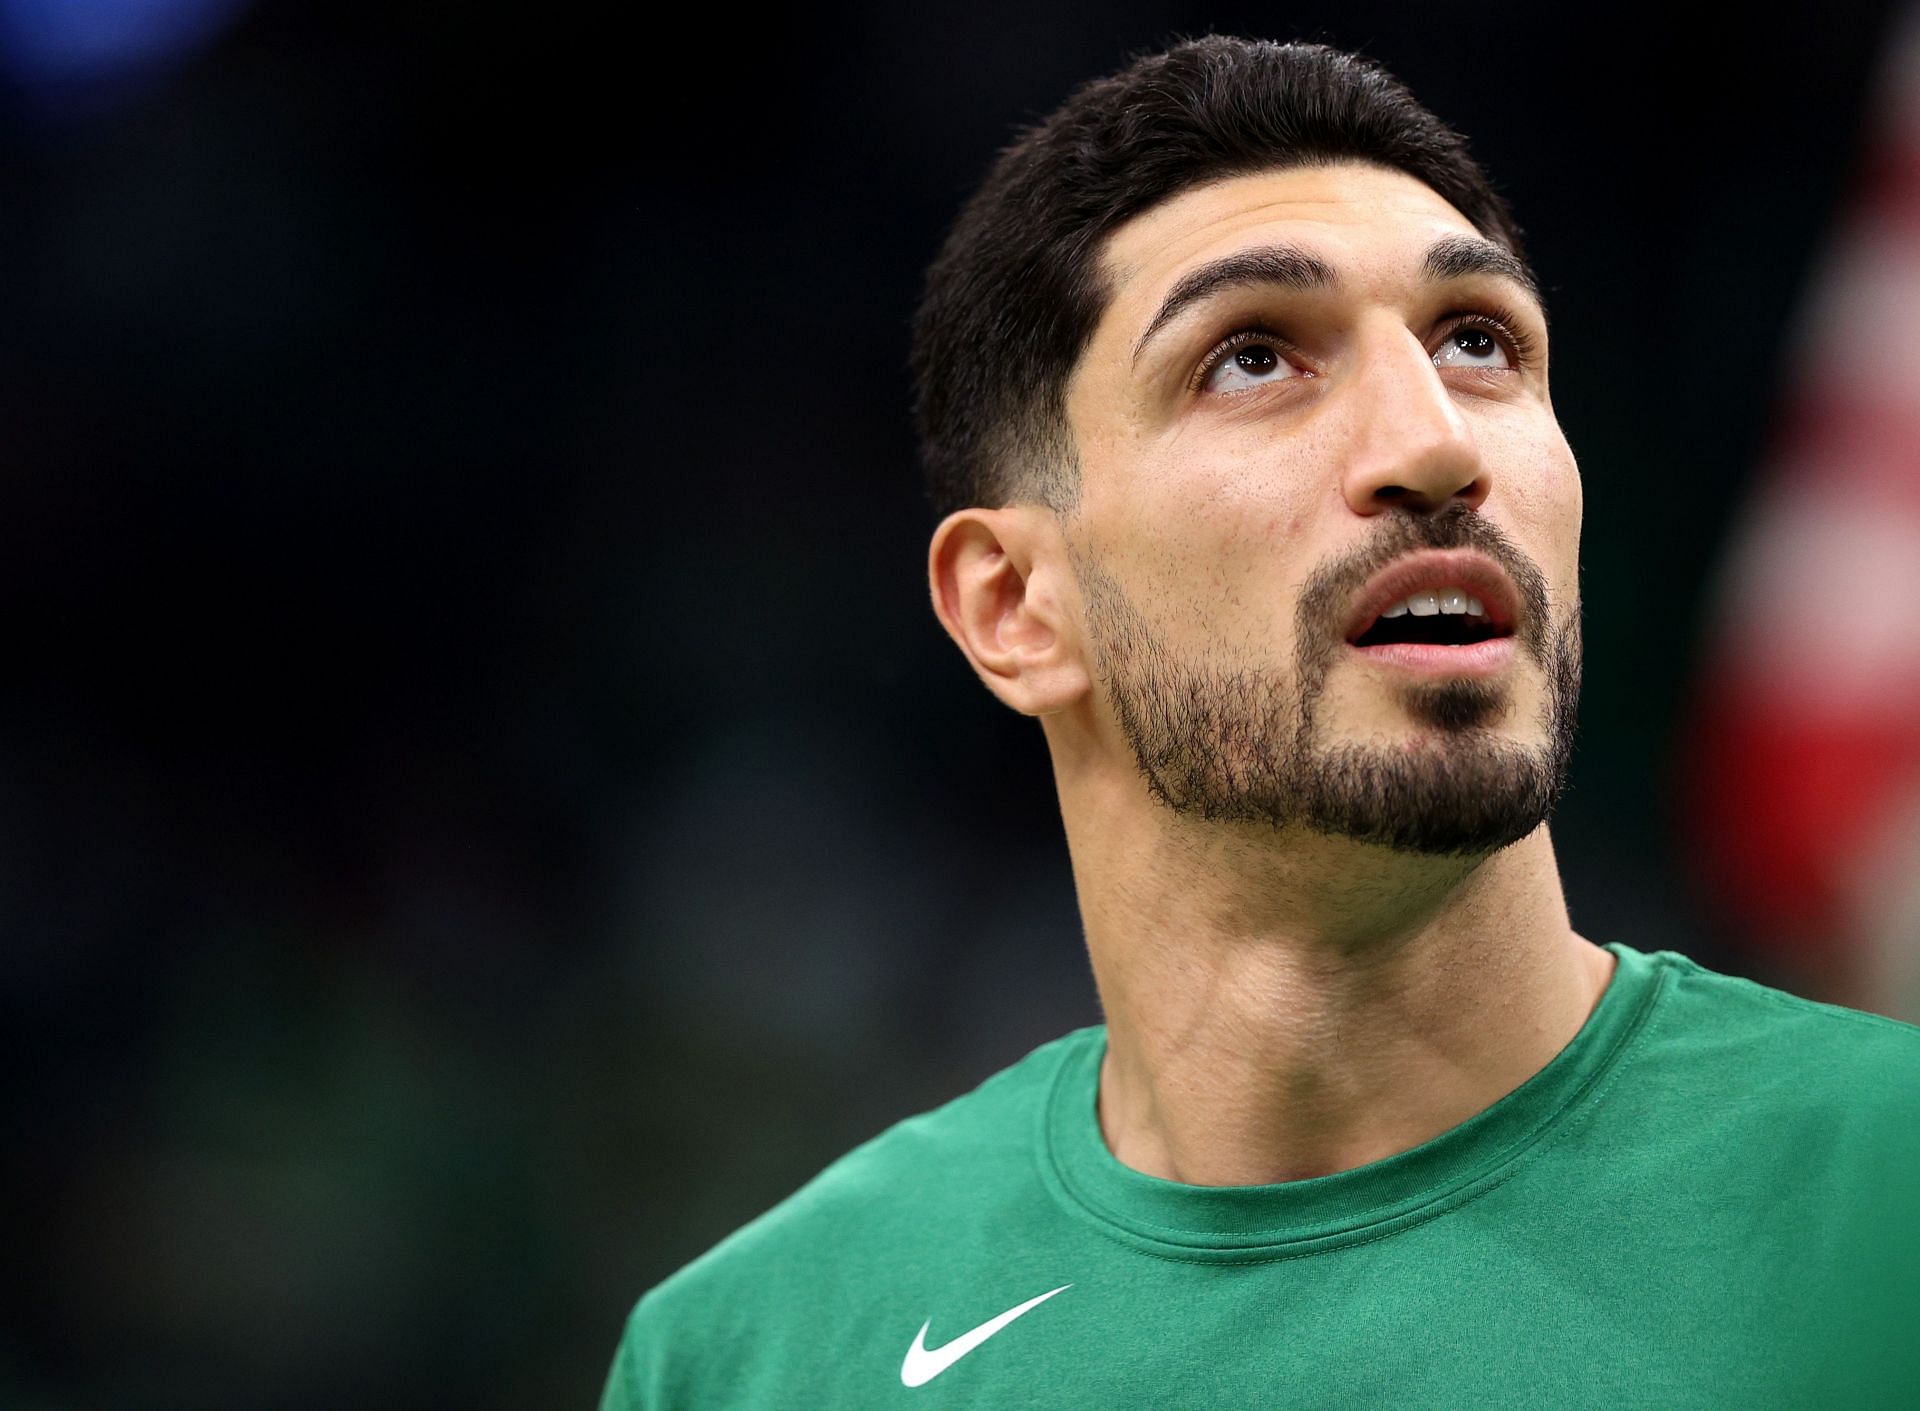 Enes Kanter Freedom is unrelenting in his human rights advocacy and fight against social injustice